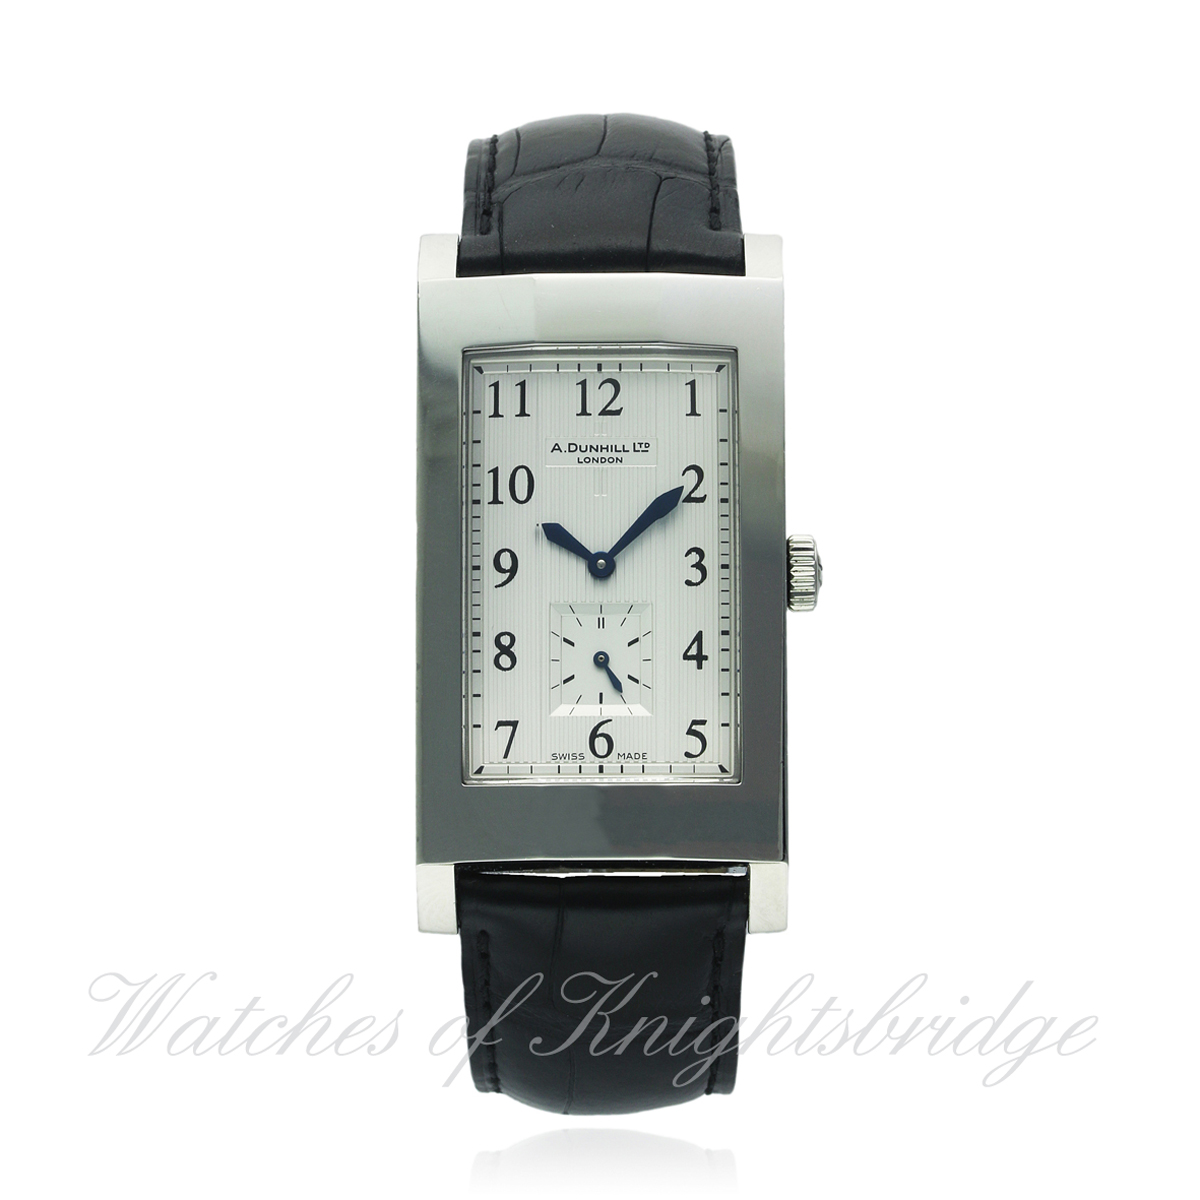 A GENTLEMAN'S STAINLESS STEEL ALFRED DUNHILL FACET WRIST WATCH CIRCA 2012, REF. UH018 WITH JAEGER